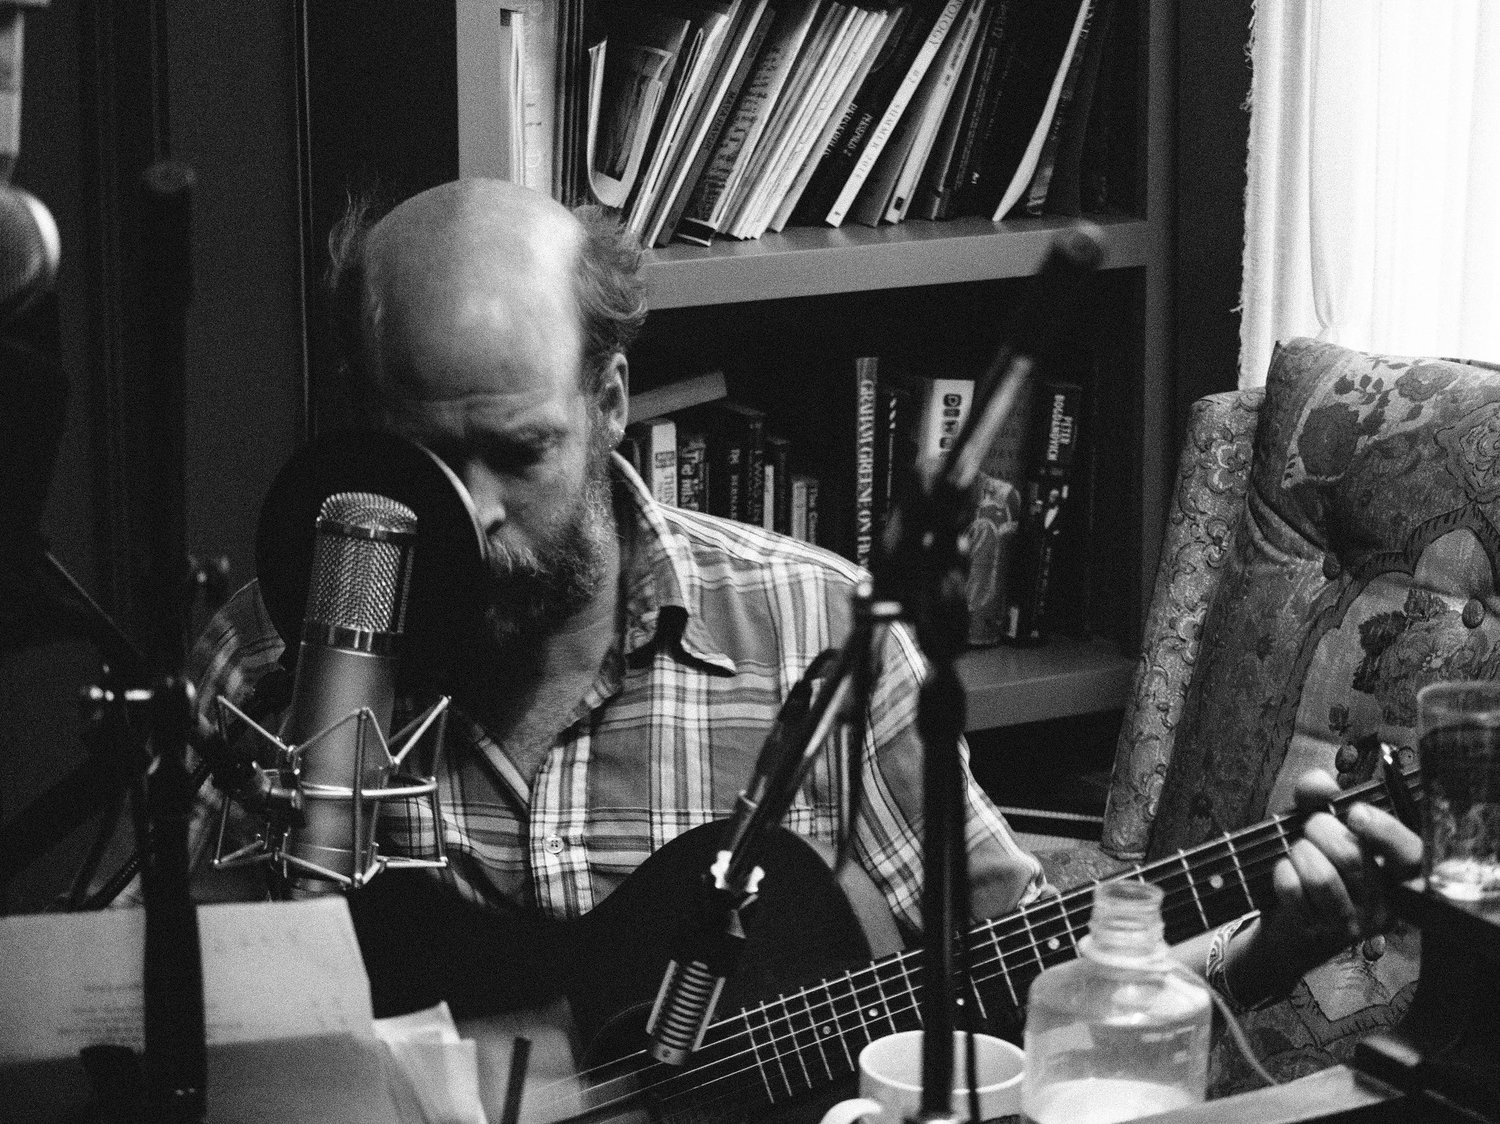 Bonnie "Prince" Billy Announces New Album, Releases "At the Back of the Pit"